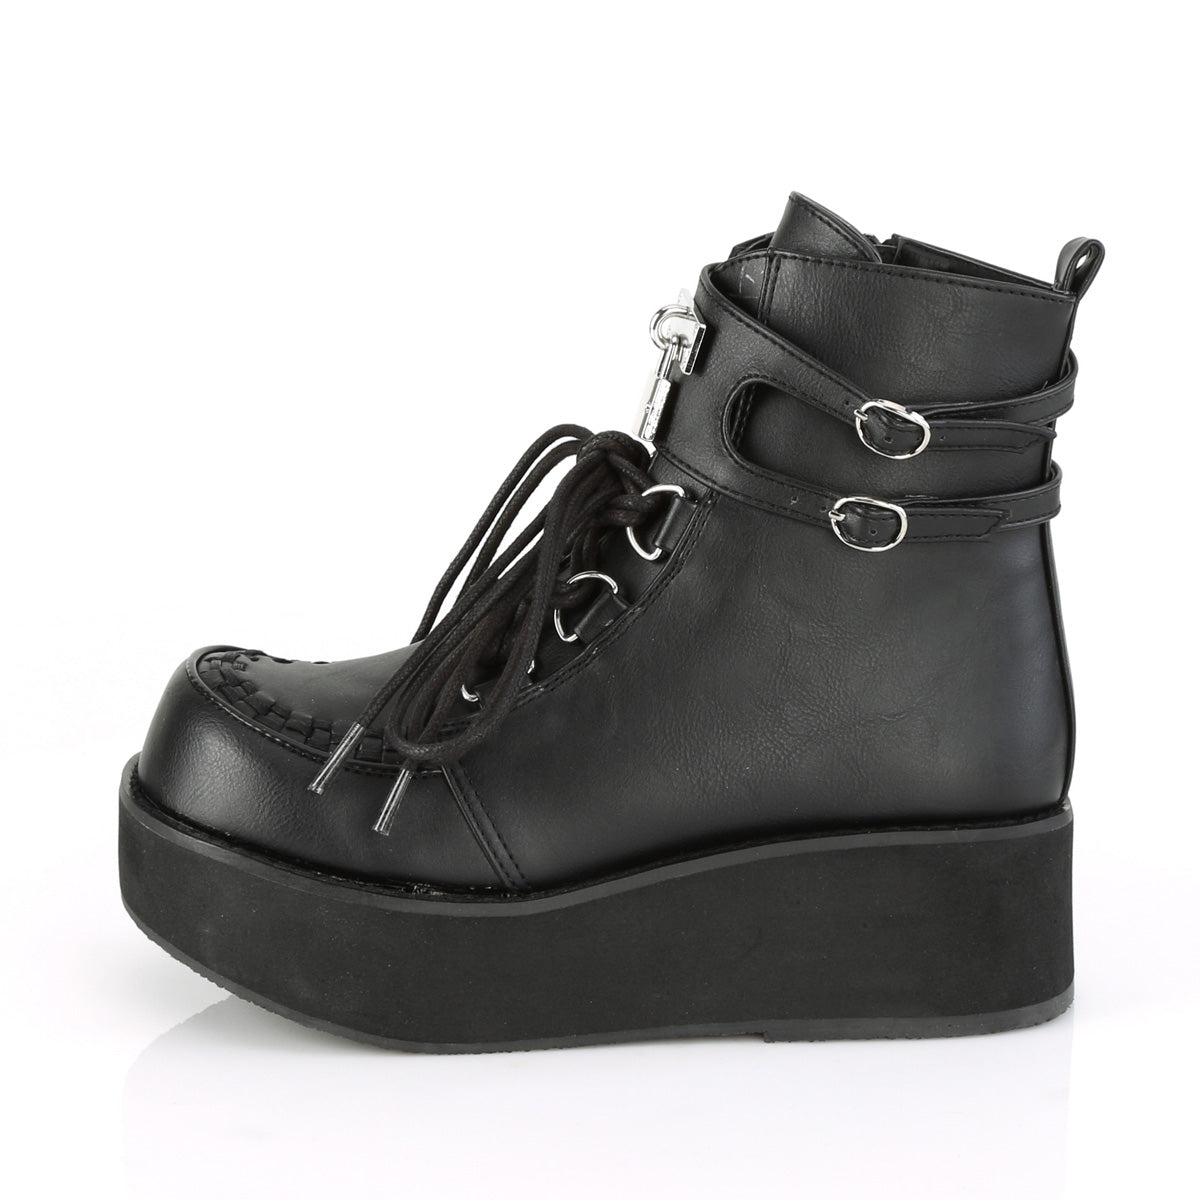 DemoniaCult Womens Ankle Boots SPRITE-70 Blk Vegan Leather